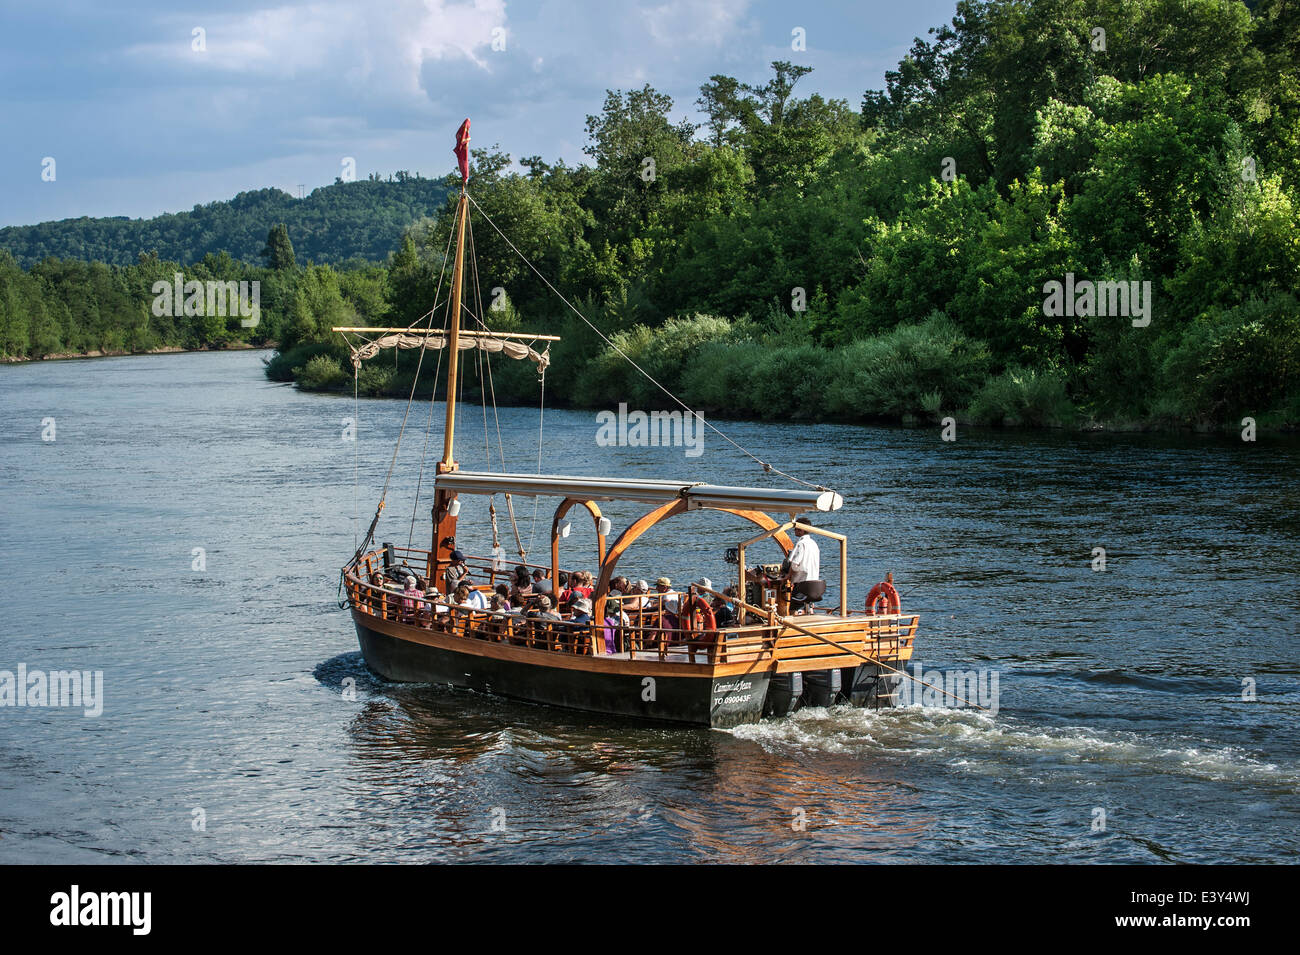 Tourists in gabare / gabarre, traditional scow, used for sightseeing tour on Dordogne River, La Roque-Gageac, Périgord, France Stock Photo